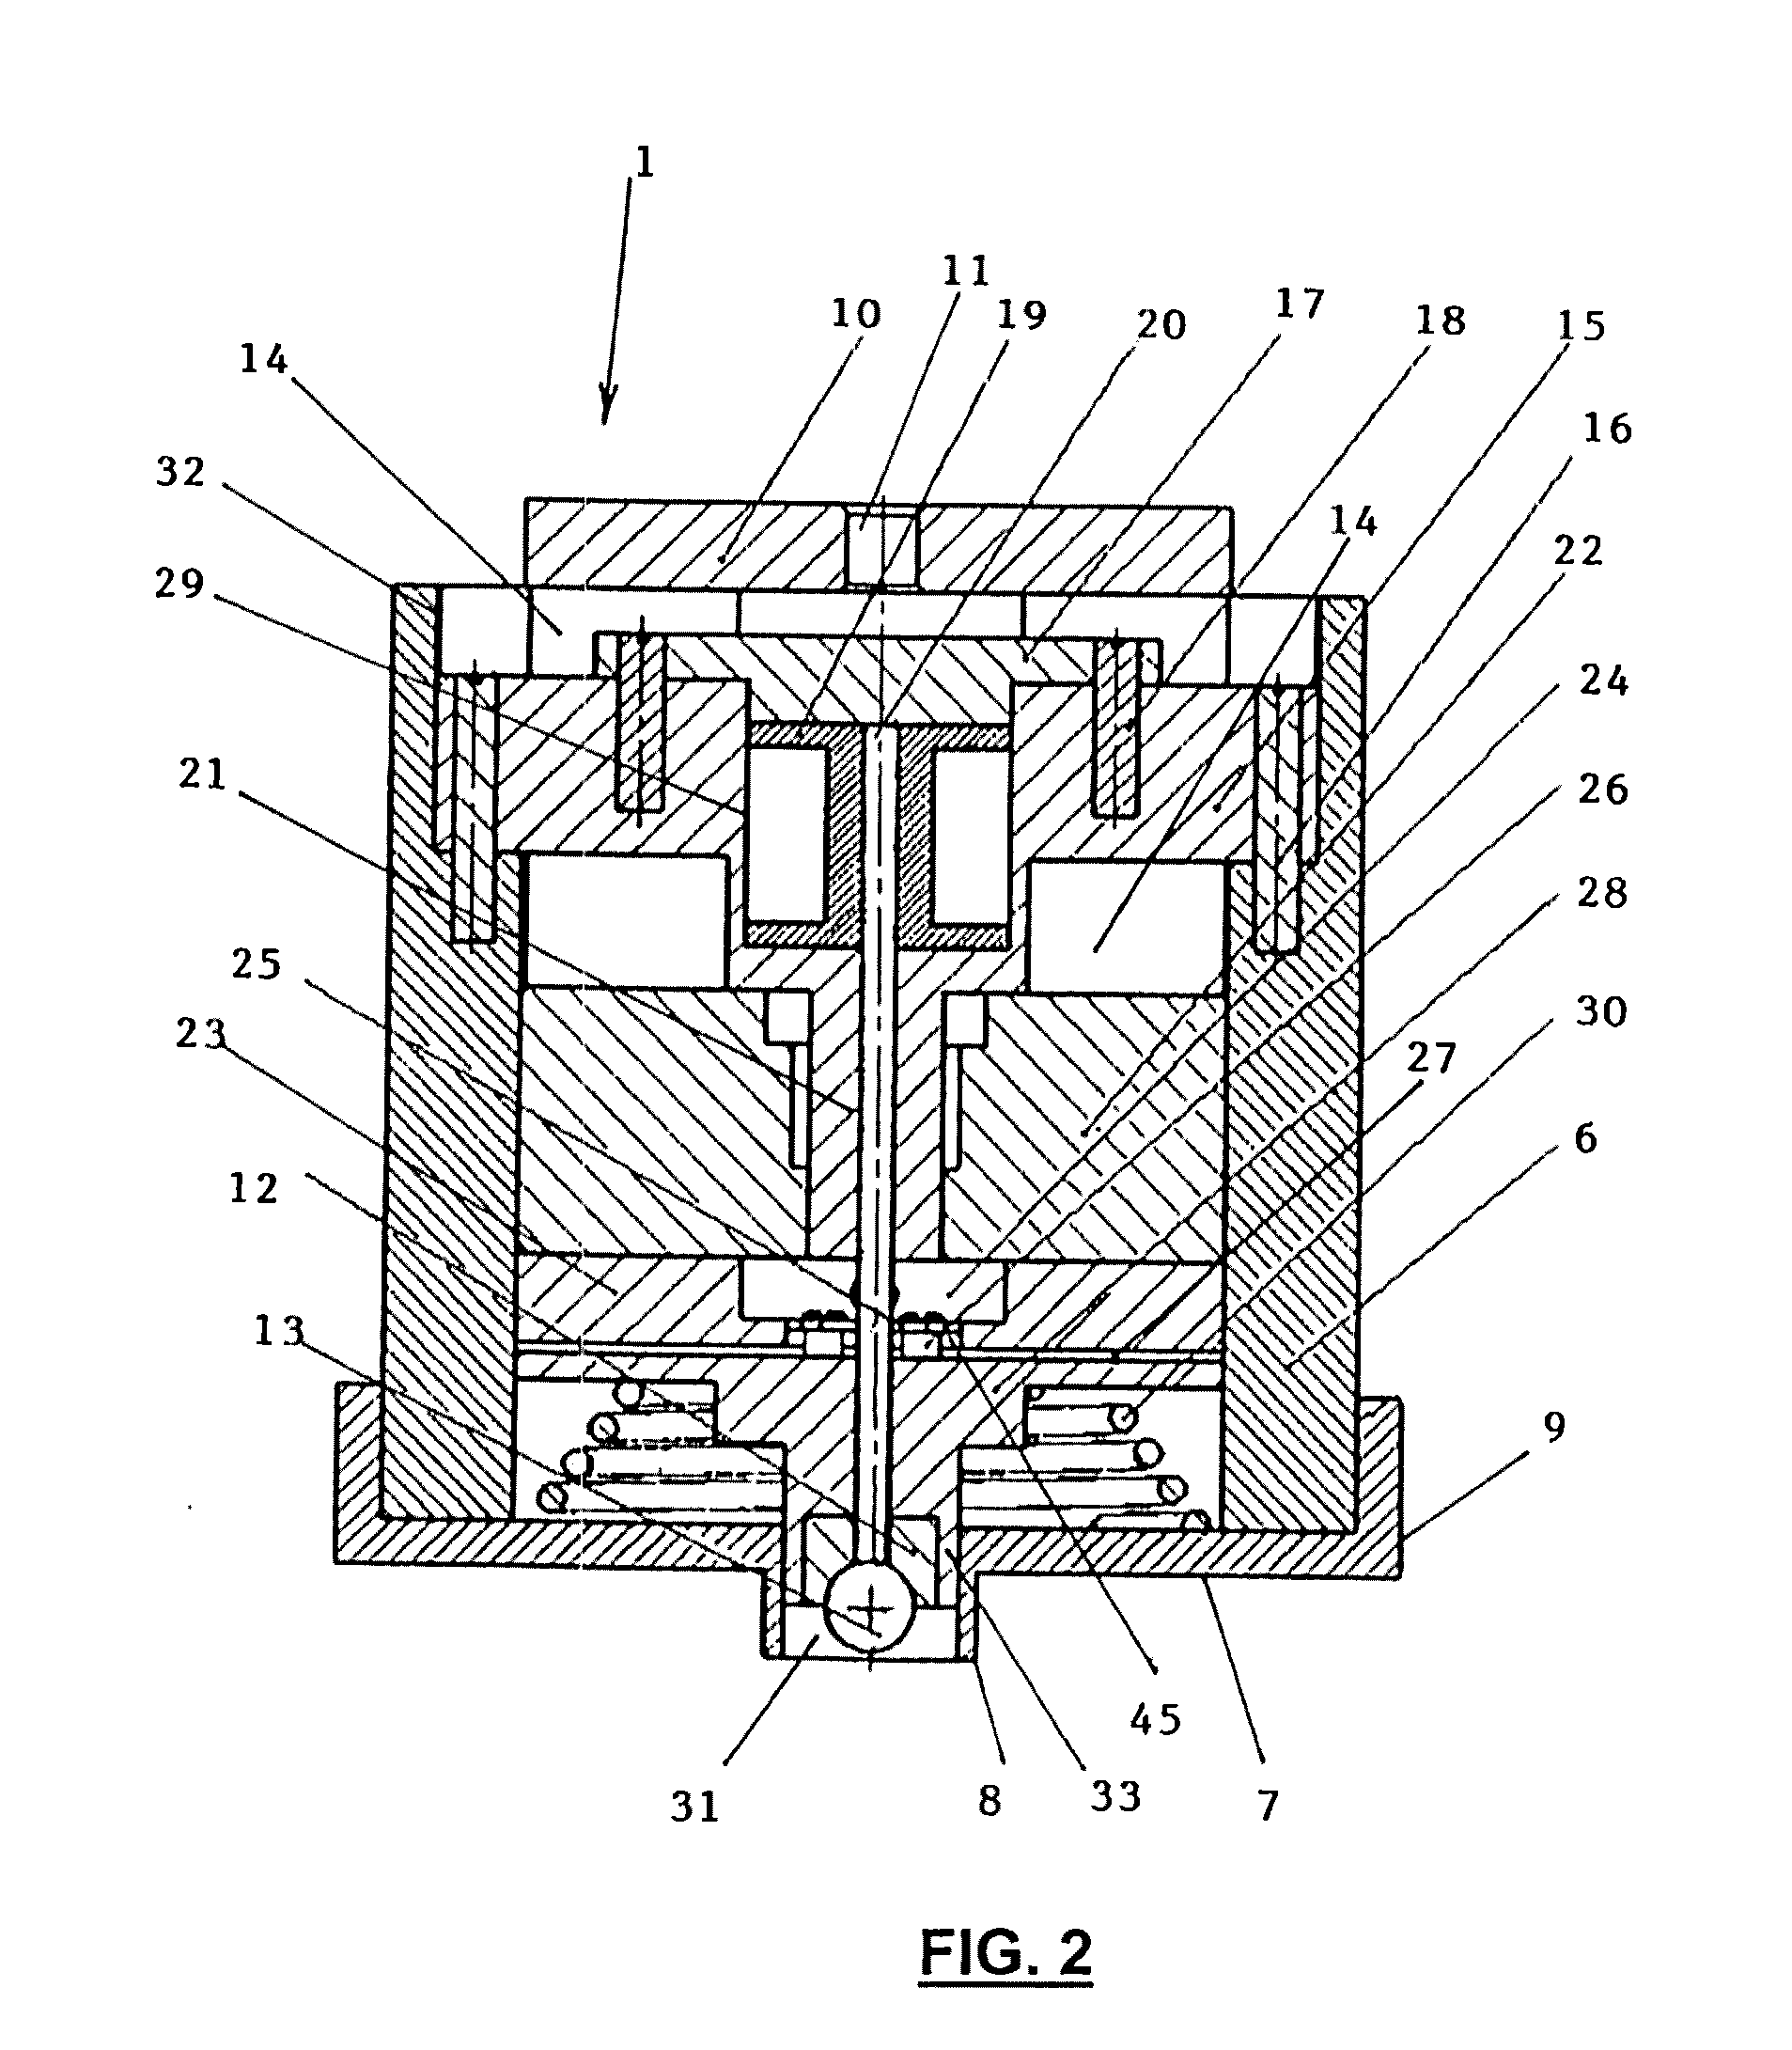 An indentation device, instrumented measurement system, and a method for determining the mechanical properties of materials by the indentation method